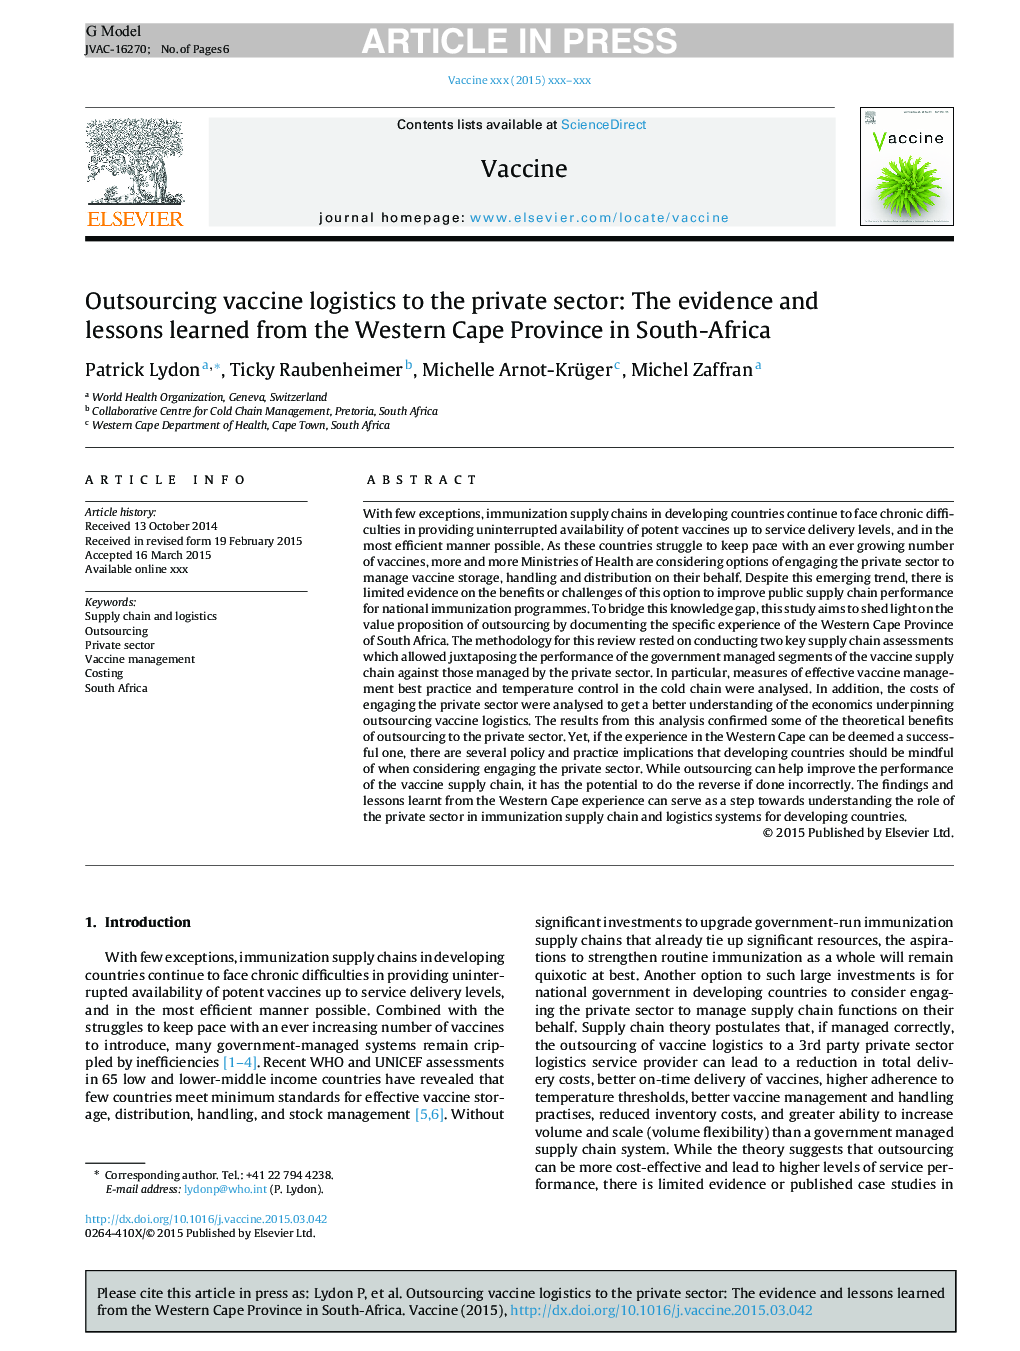 Outsourcing vaccine logistics to the private sector: The evidence and lessons learned from the Western Cape Province in South-Africa